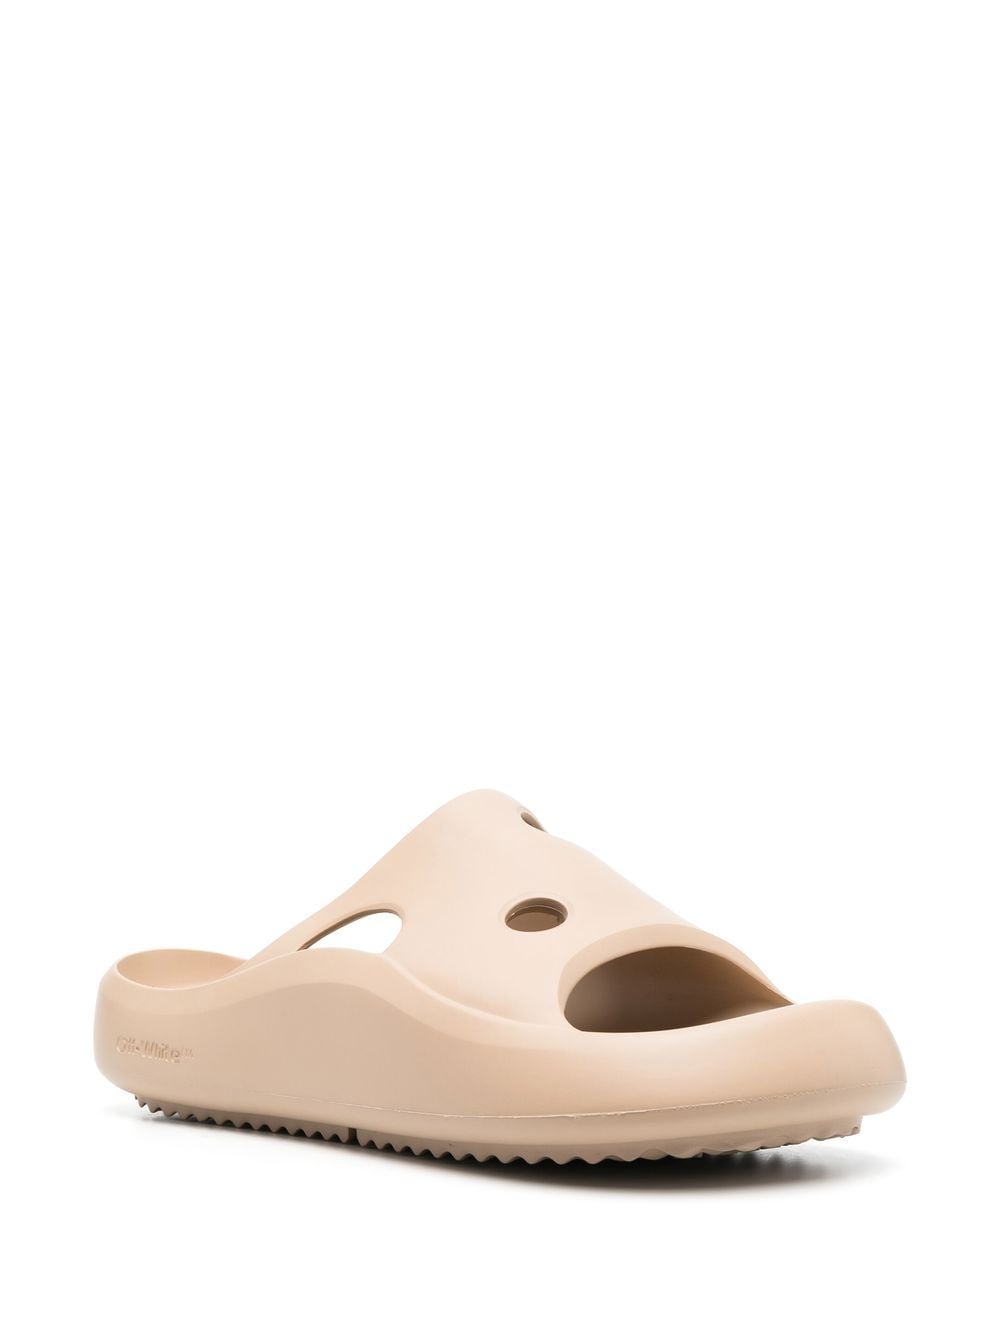 Off-White Meteor slippers - Beige